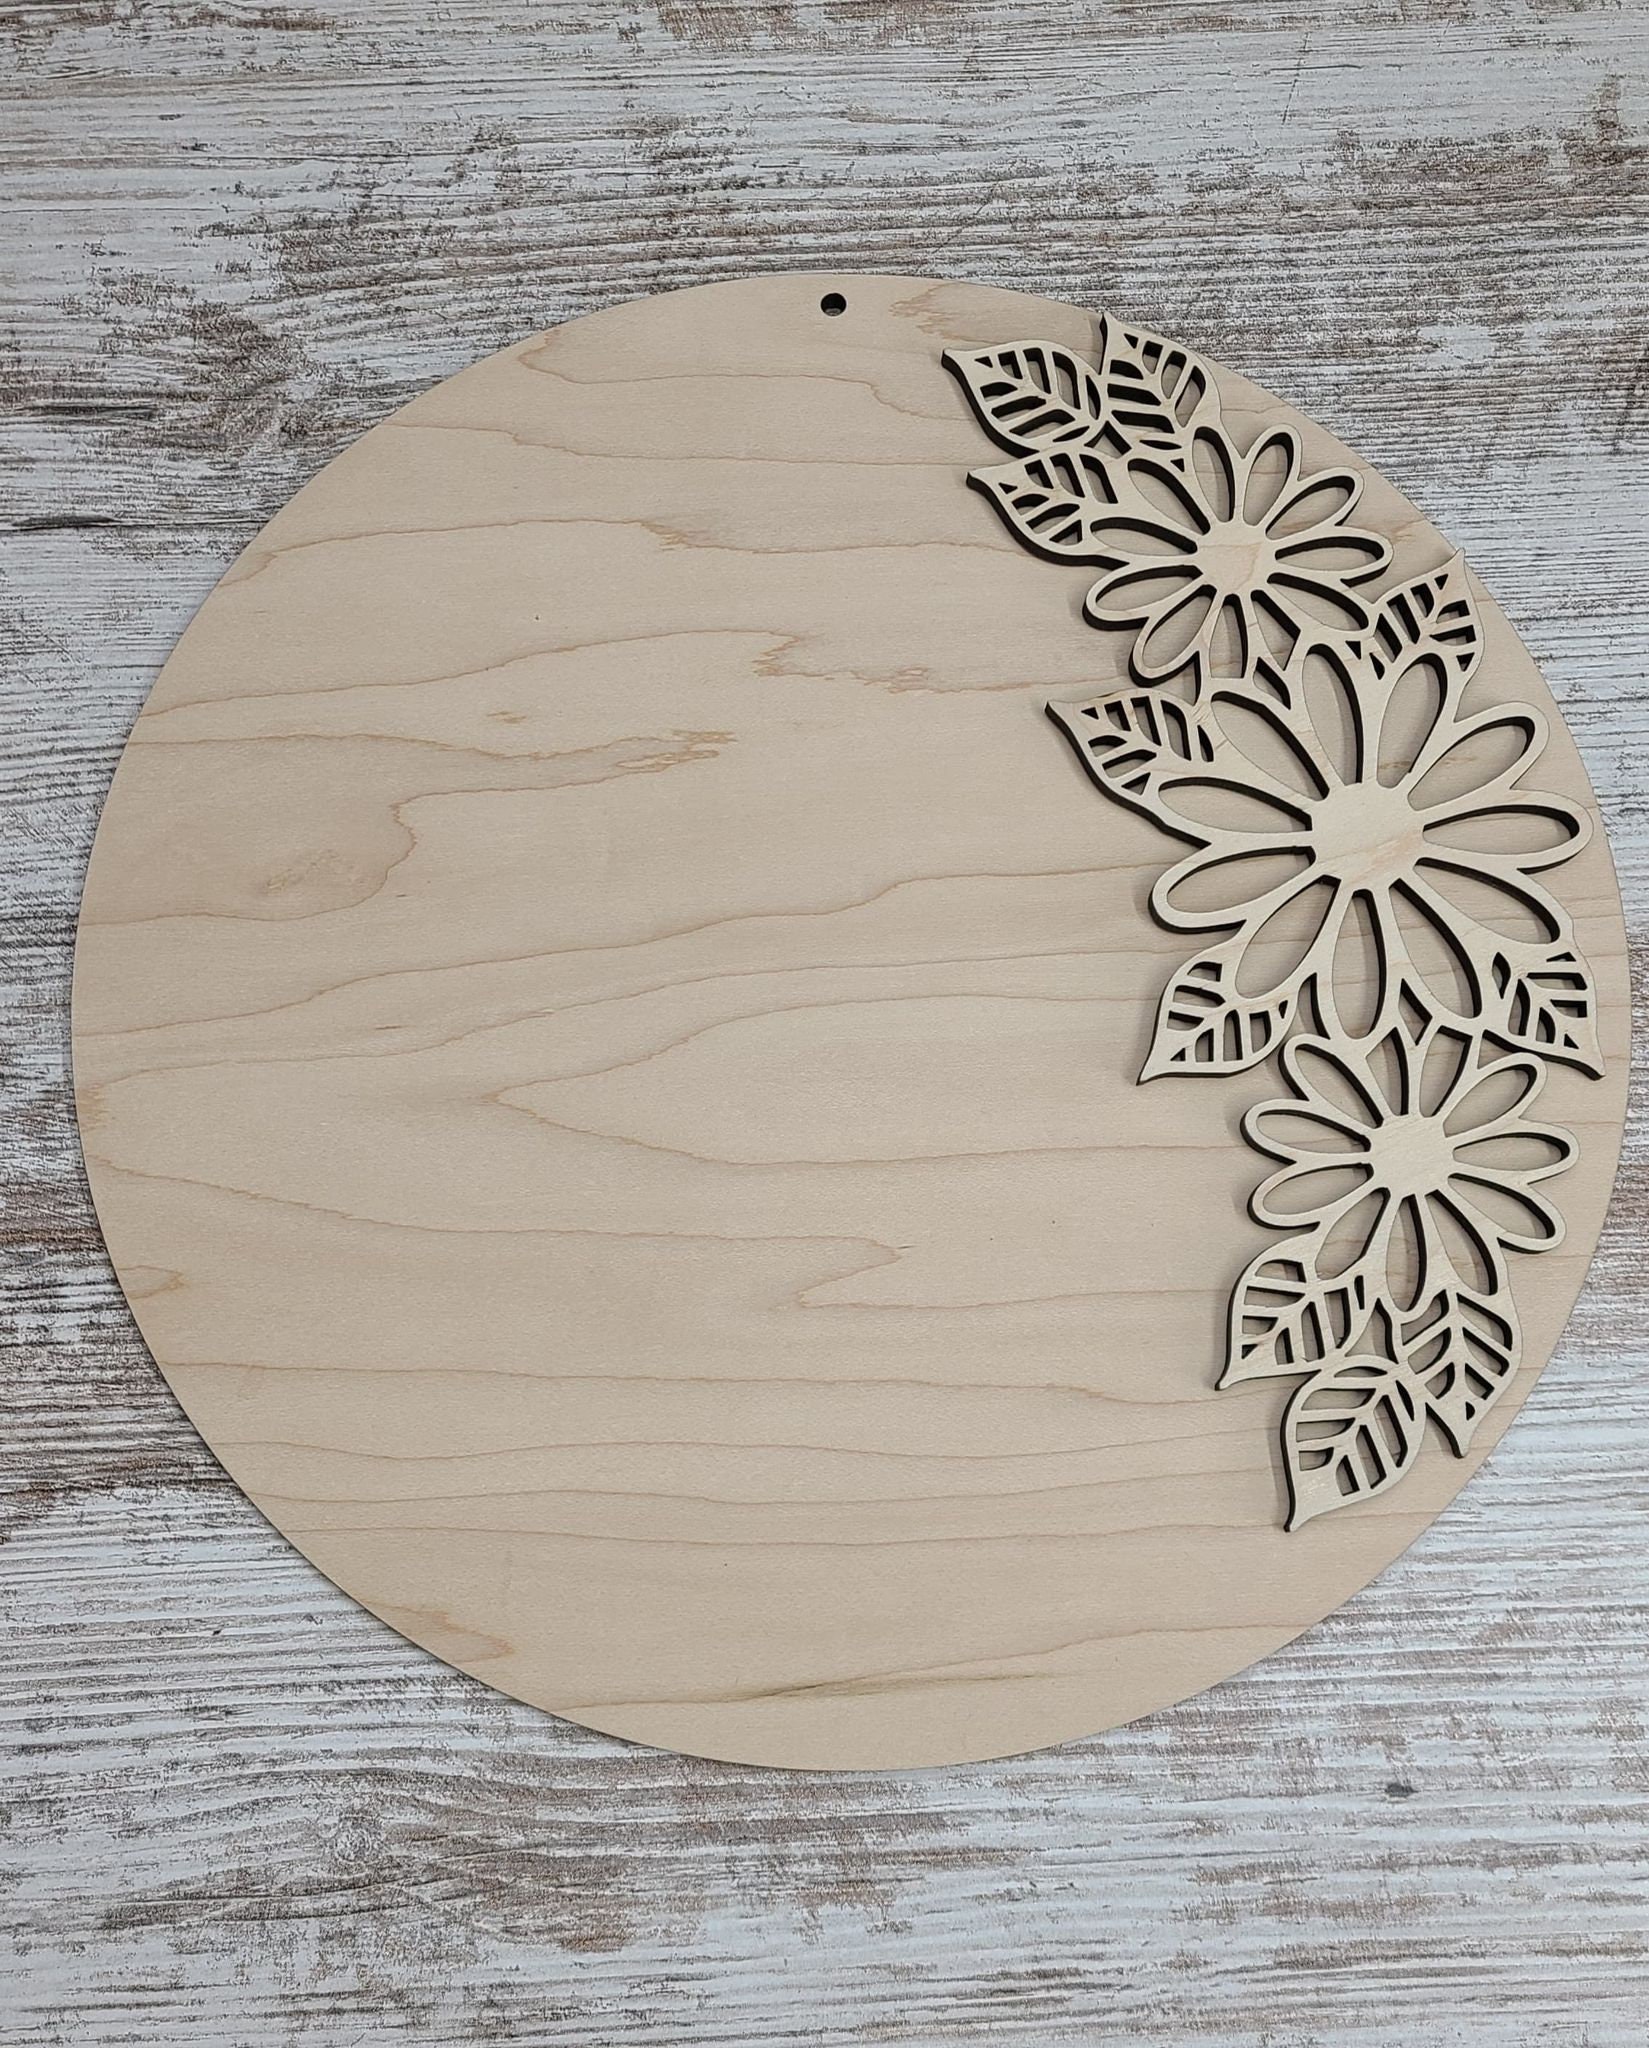 Wood Floral Rose Cut out, Flower shapes with leaves, Wooden floral pattern  for signs, flowery blanks for crafts, unfinished DIY, sign making